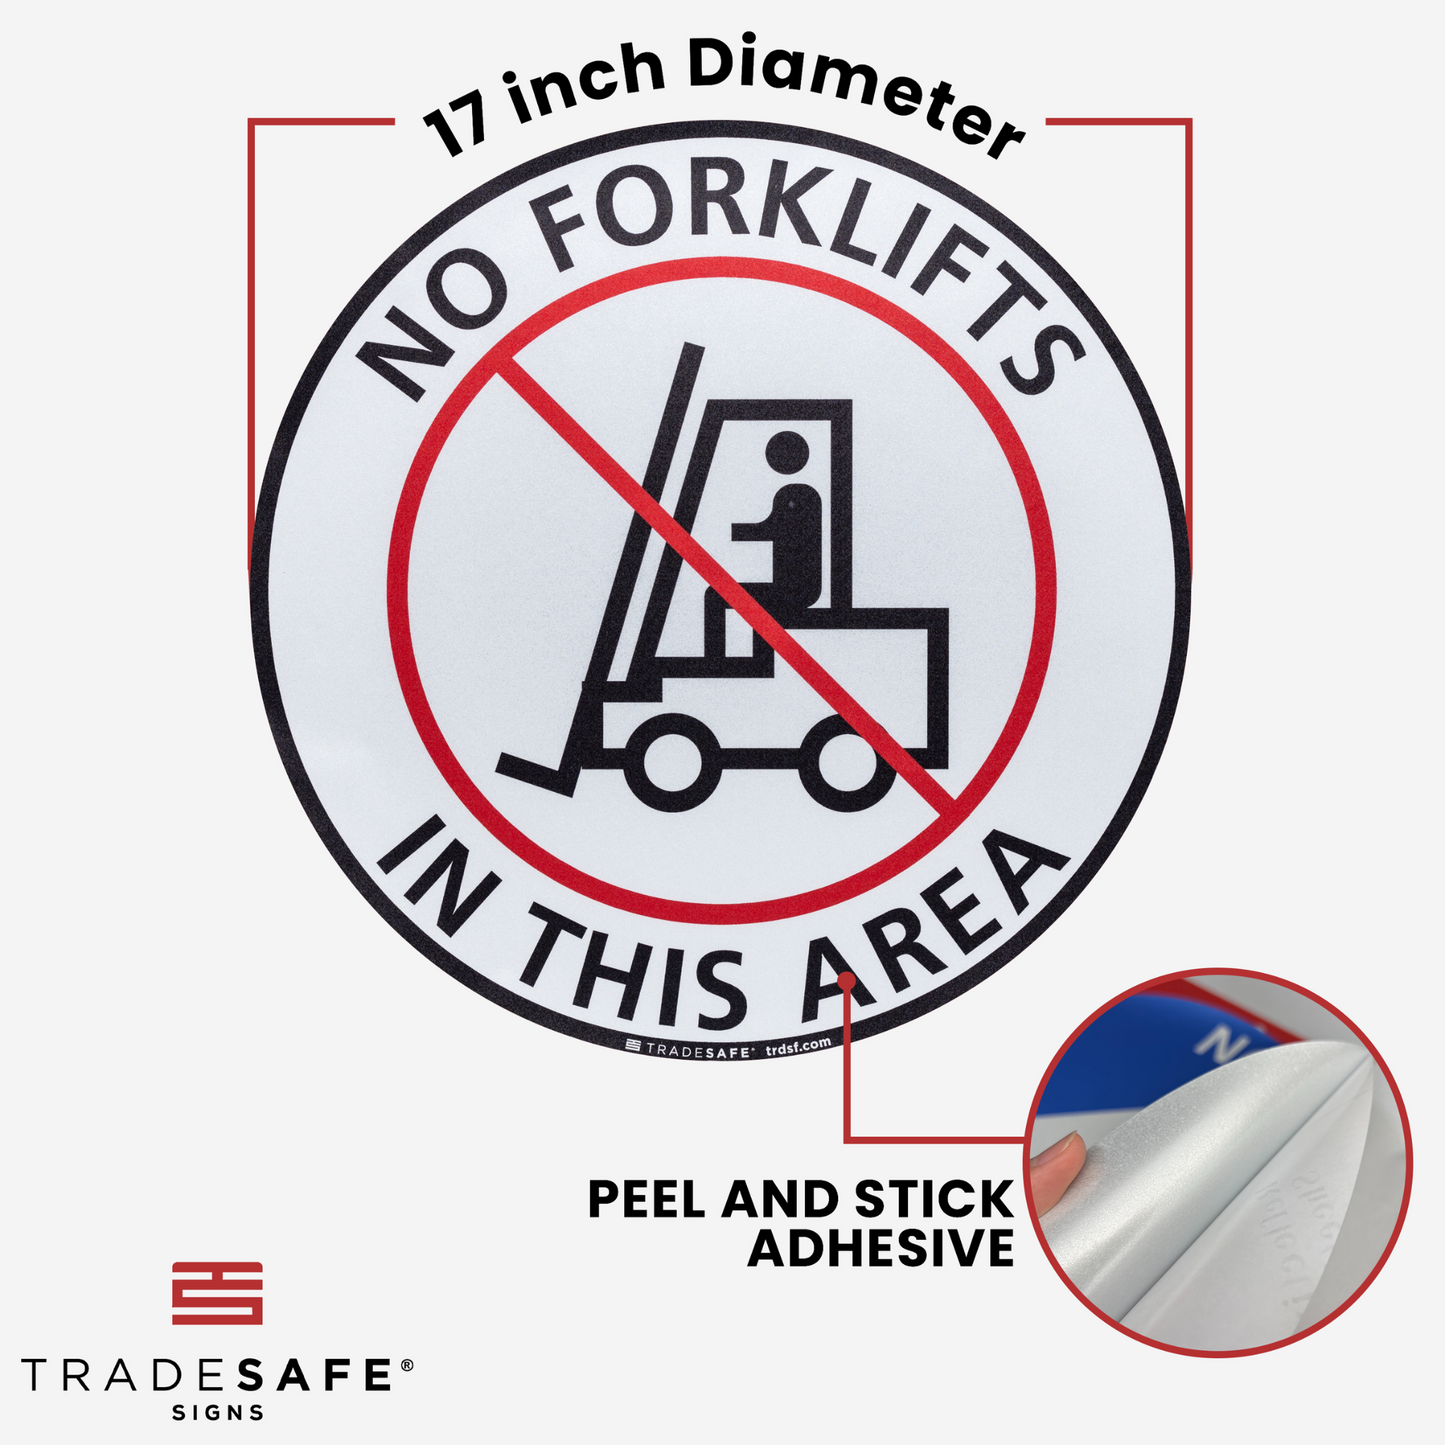 dimensions of no forklifts in this area sign